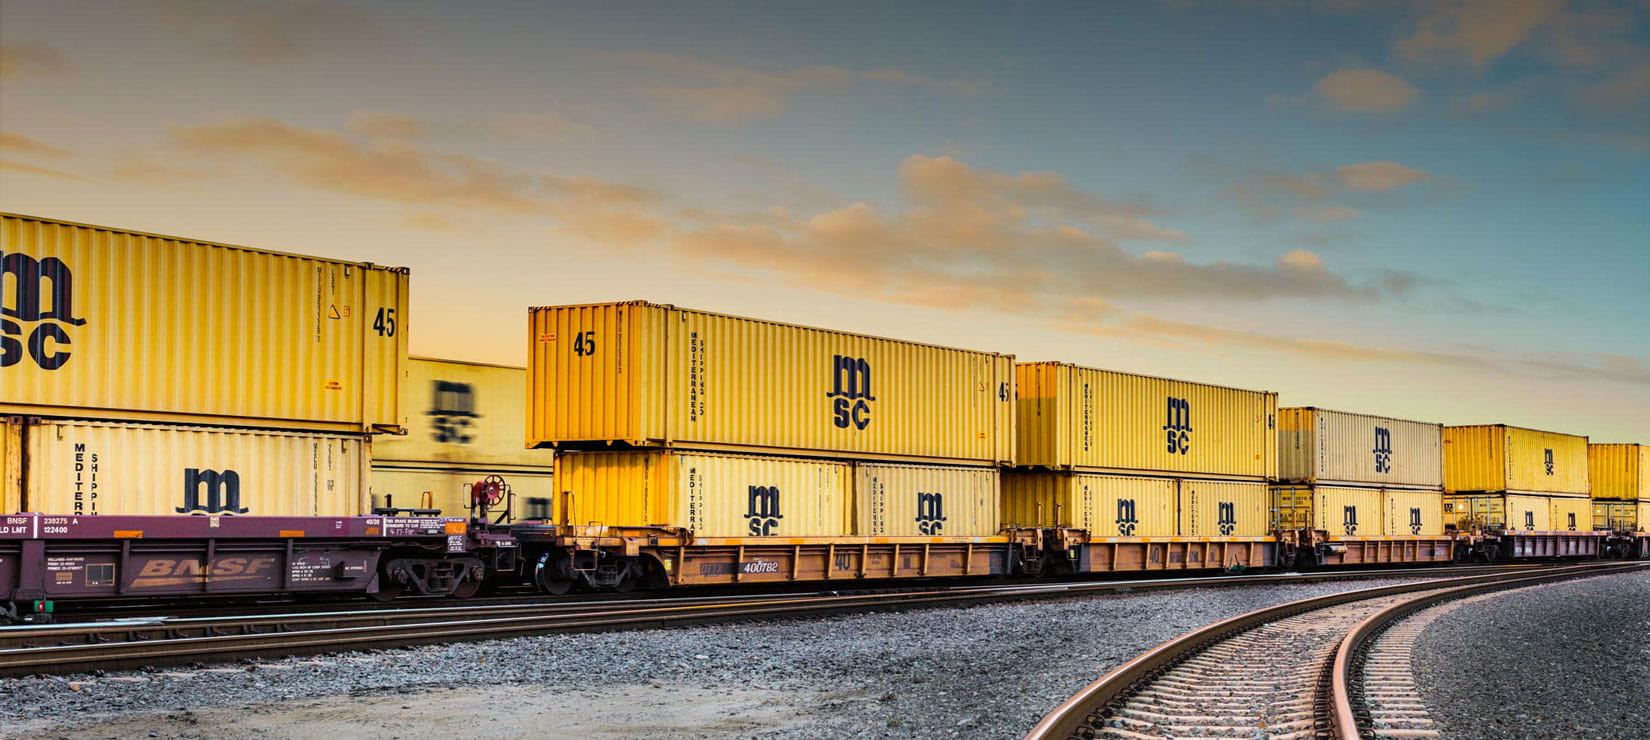 MSC Dry containers on train, Port of Long Beach 